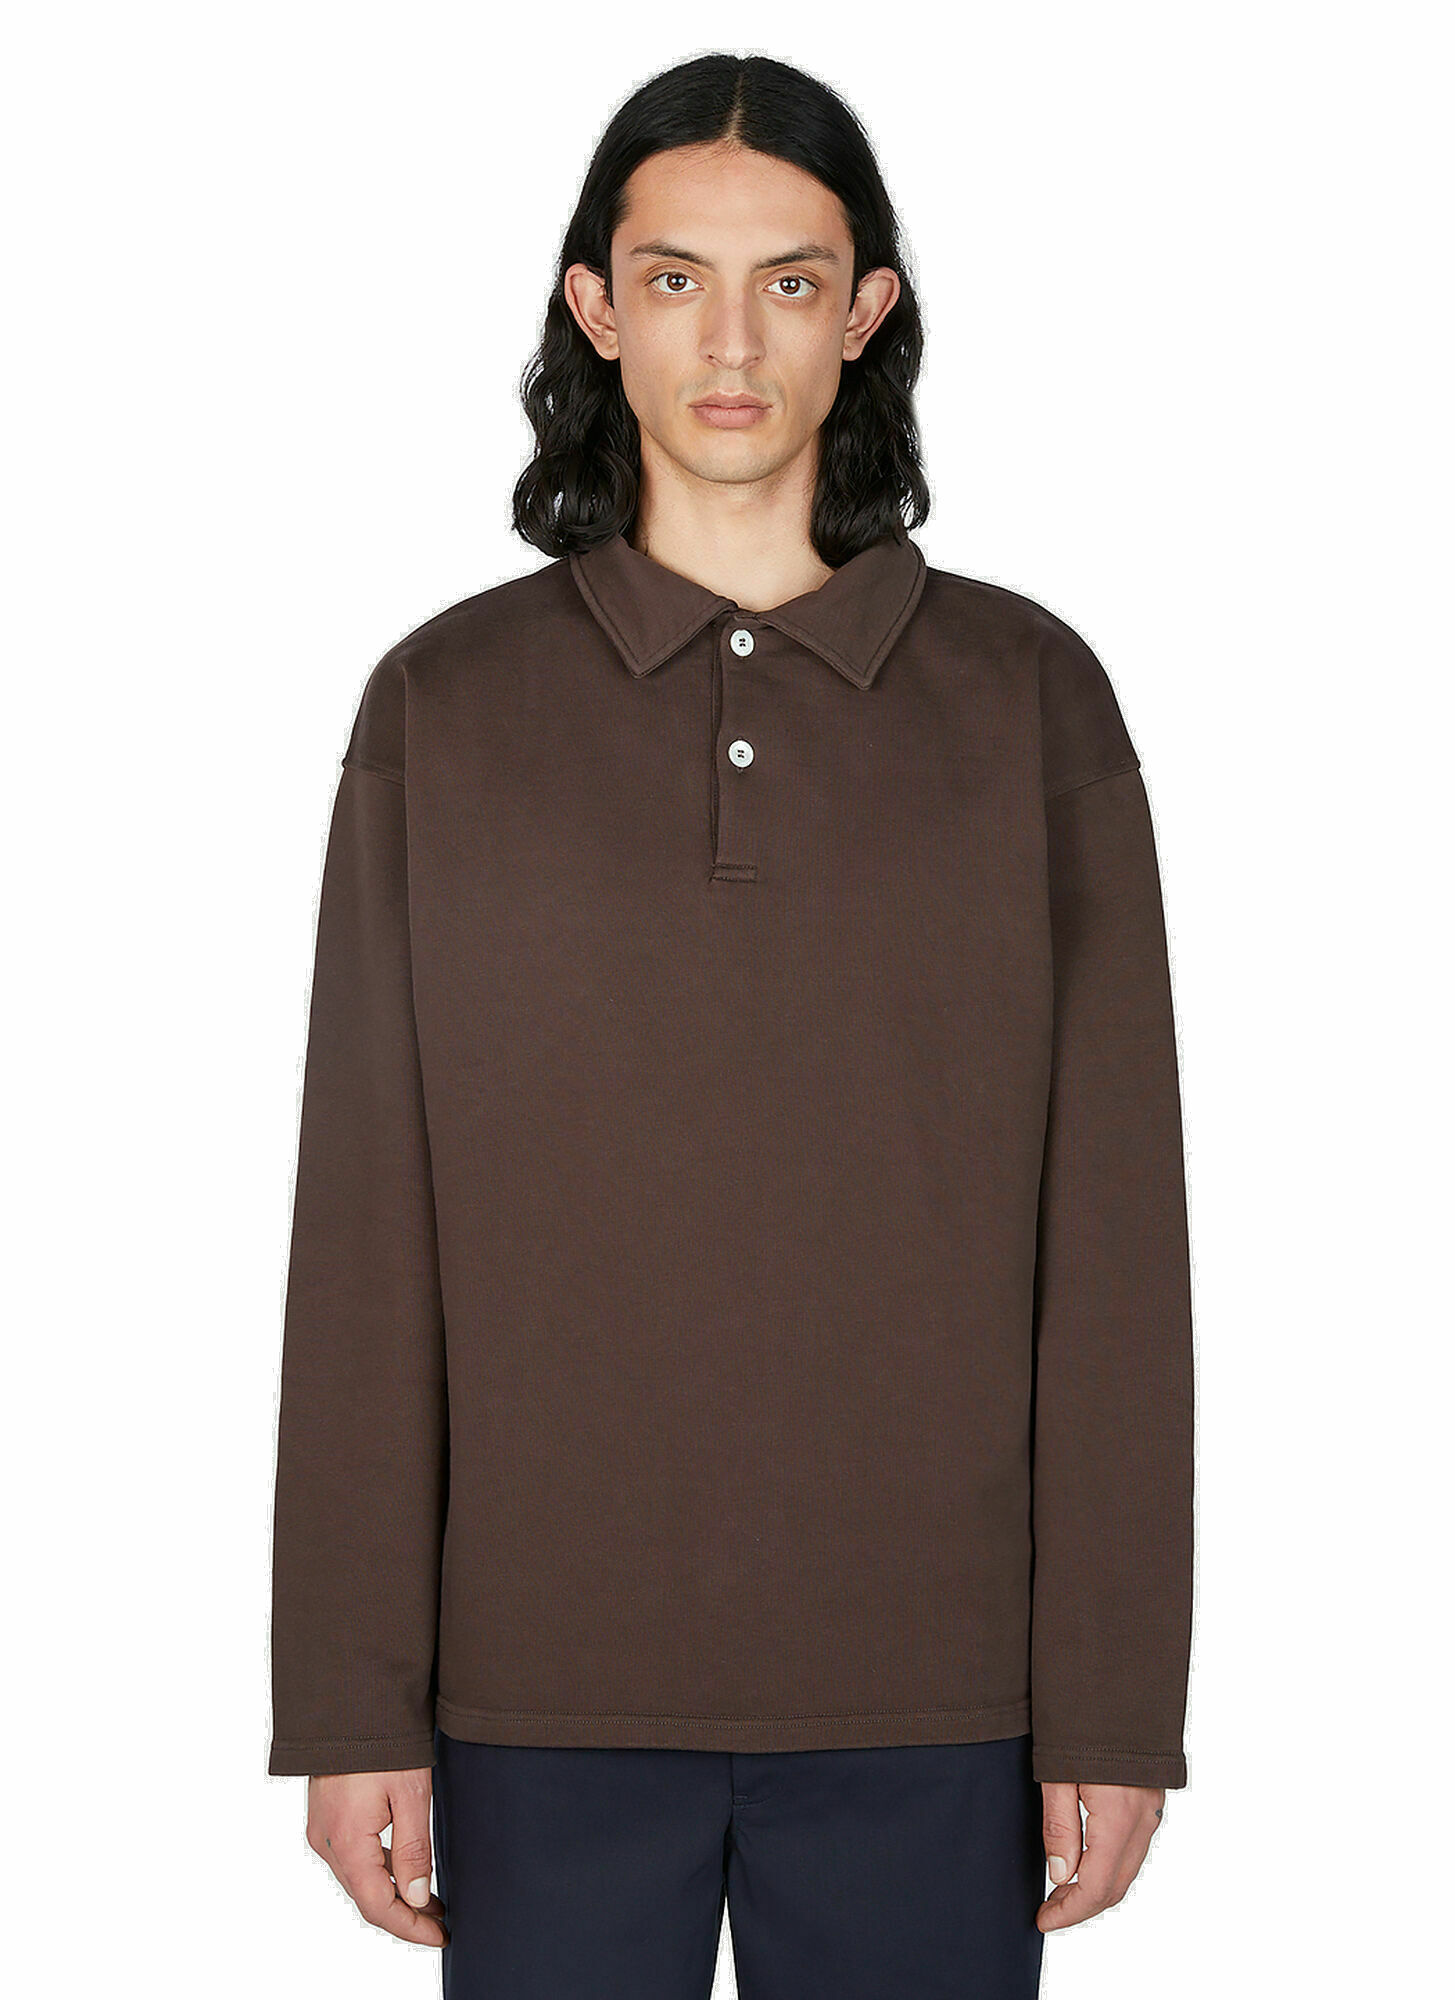 Photo: ANOTHER ASPECT - ANOTHER 1.0 Polo Shirt in Brown